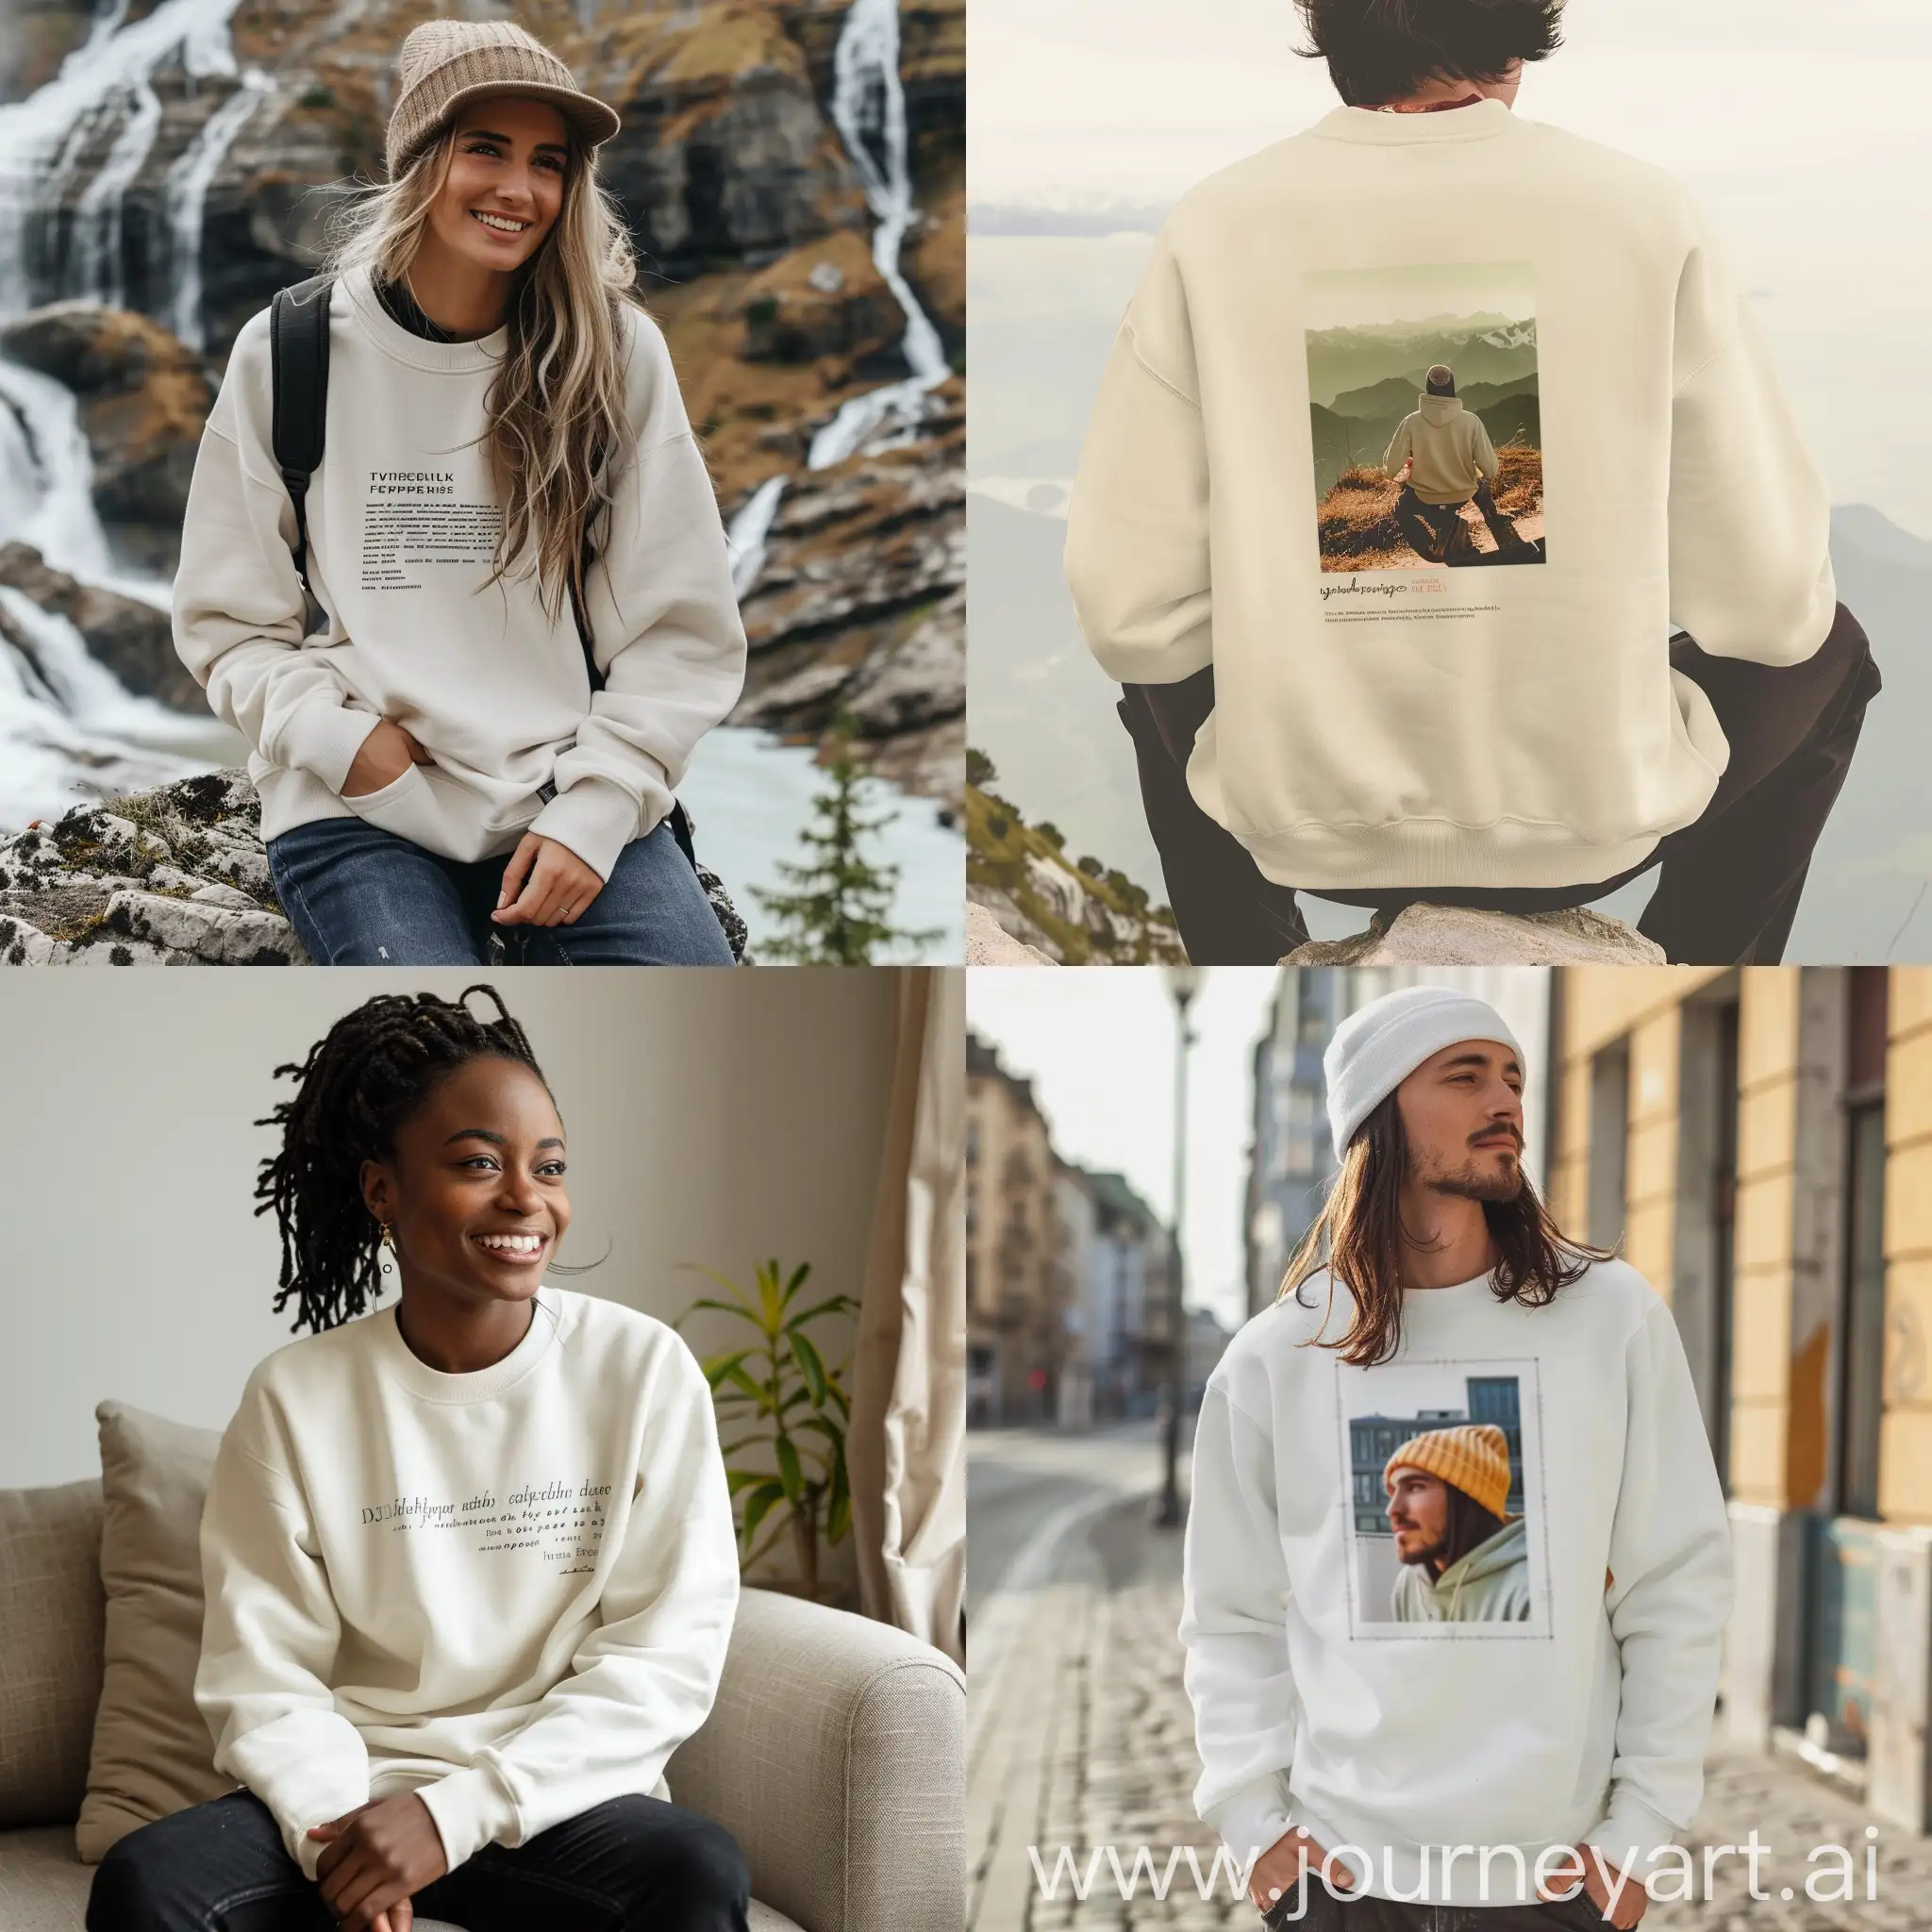 A sweatshirt design with photo and text